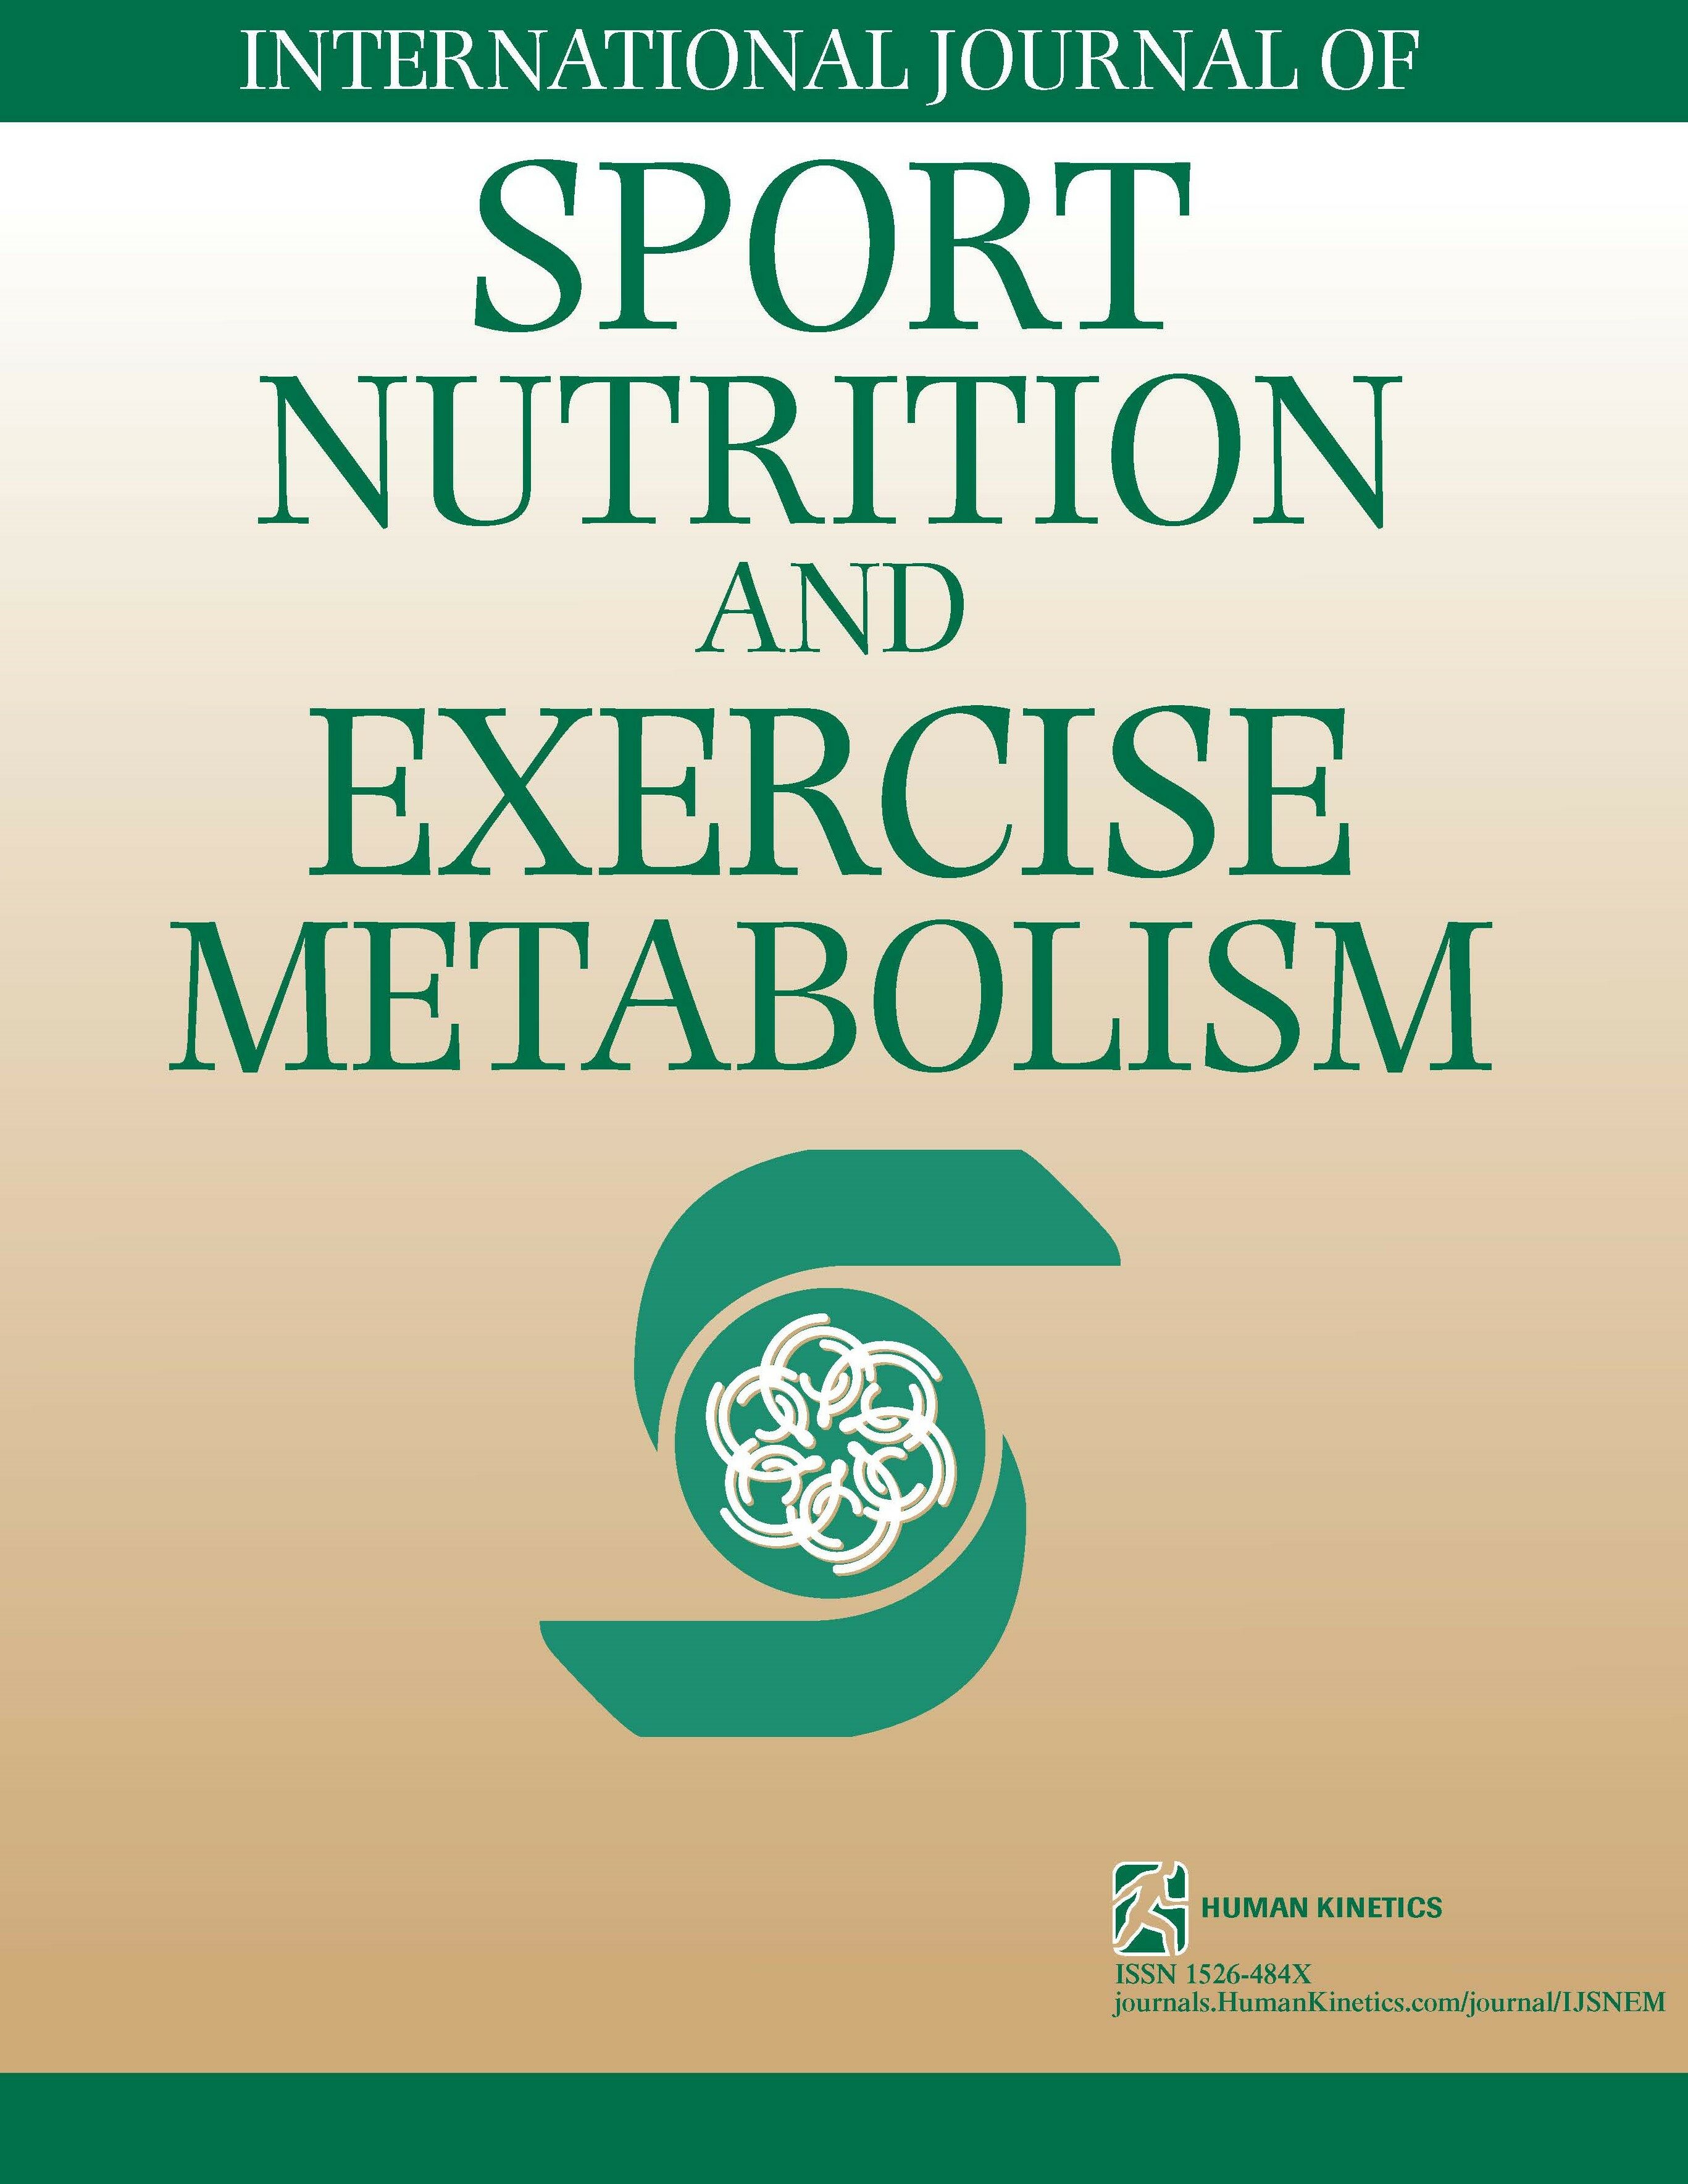 Total Energy Expenditure and Nutritional Intake in Continuous Multiday Ultramarathon Events